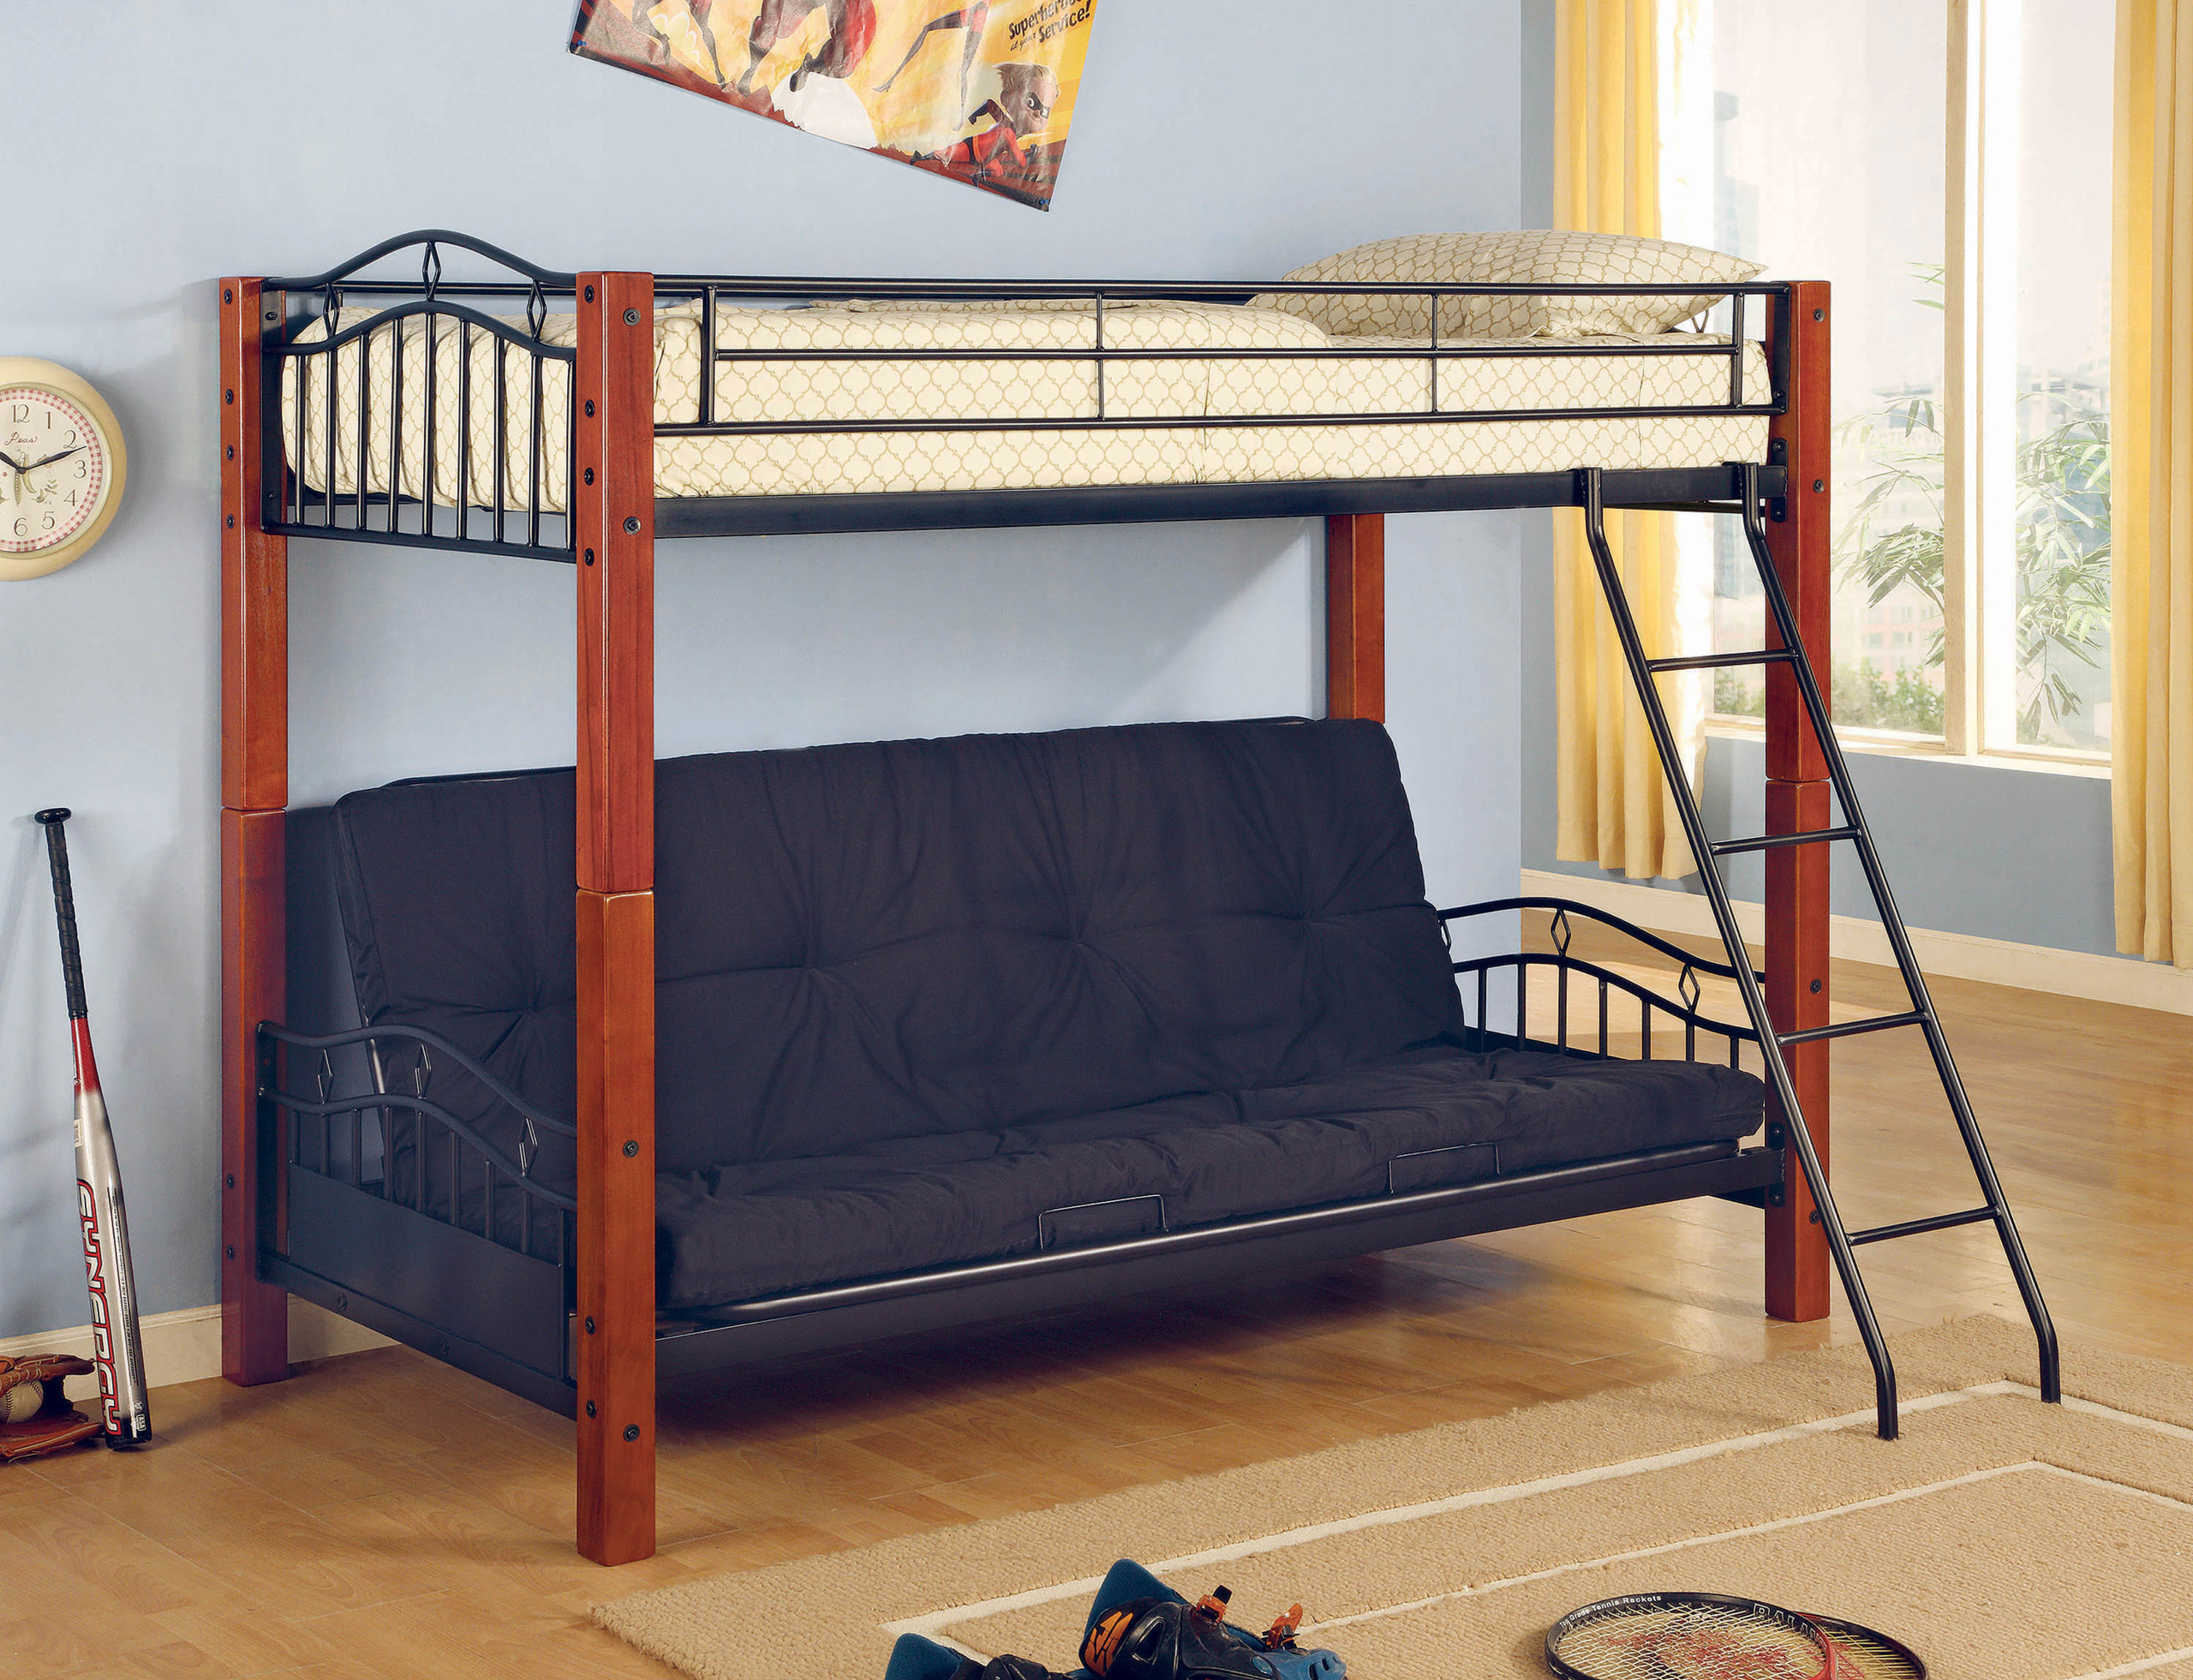 Full Over Futon Bunk Bed Visualhunt, Futon Bunk Bed With Storage